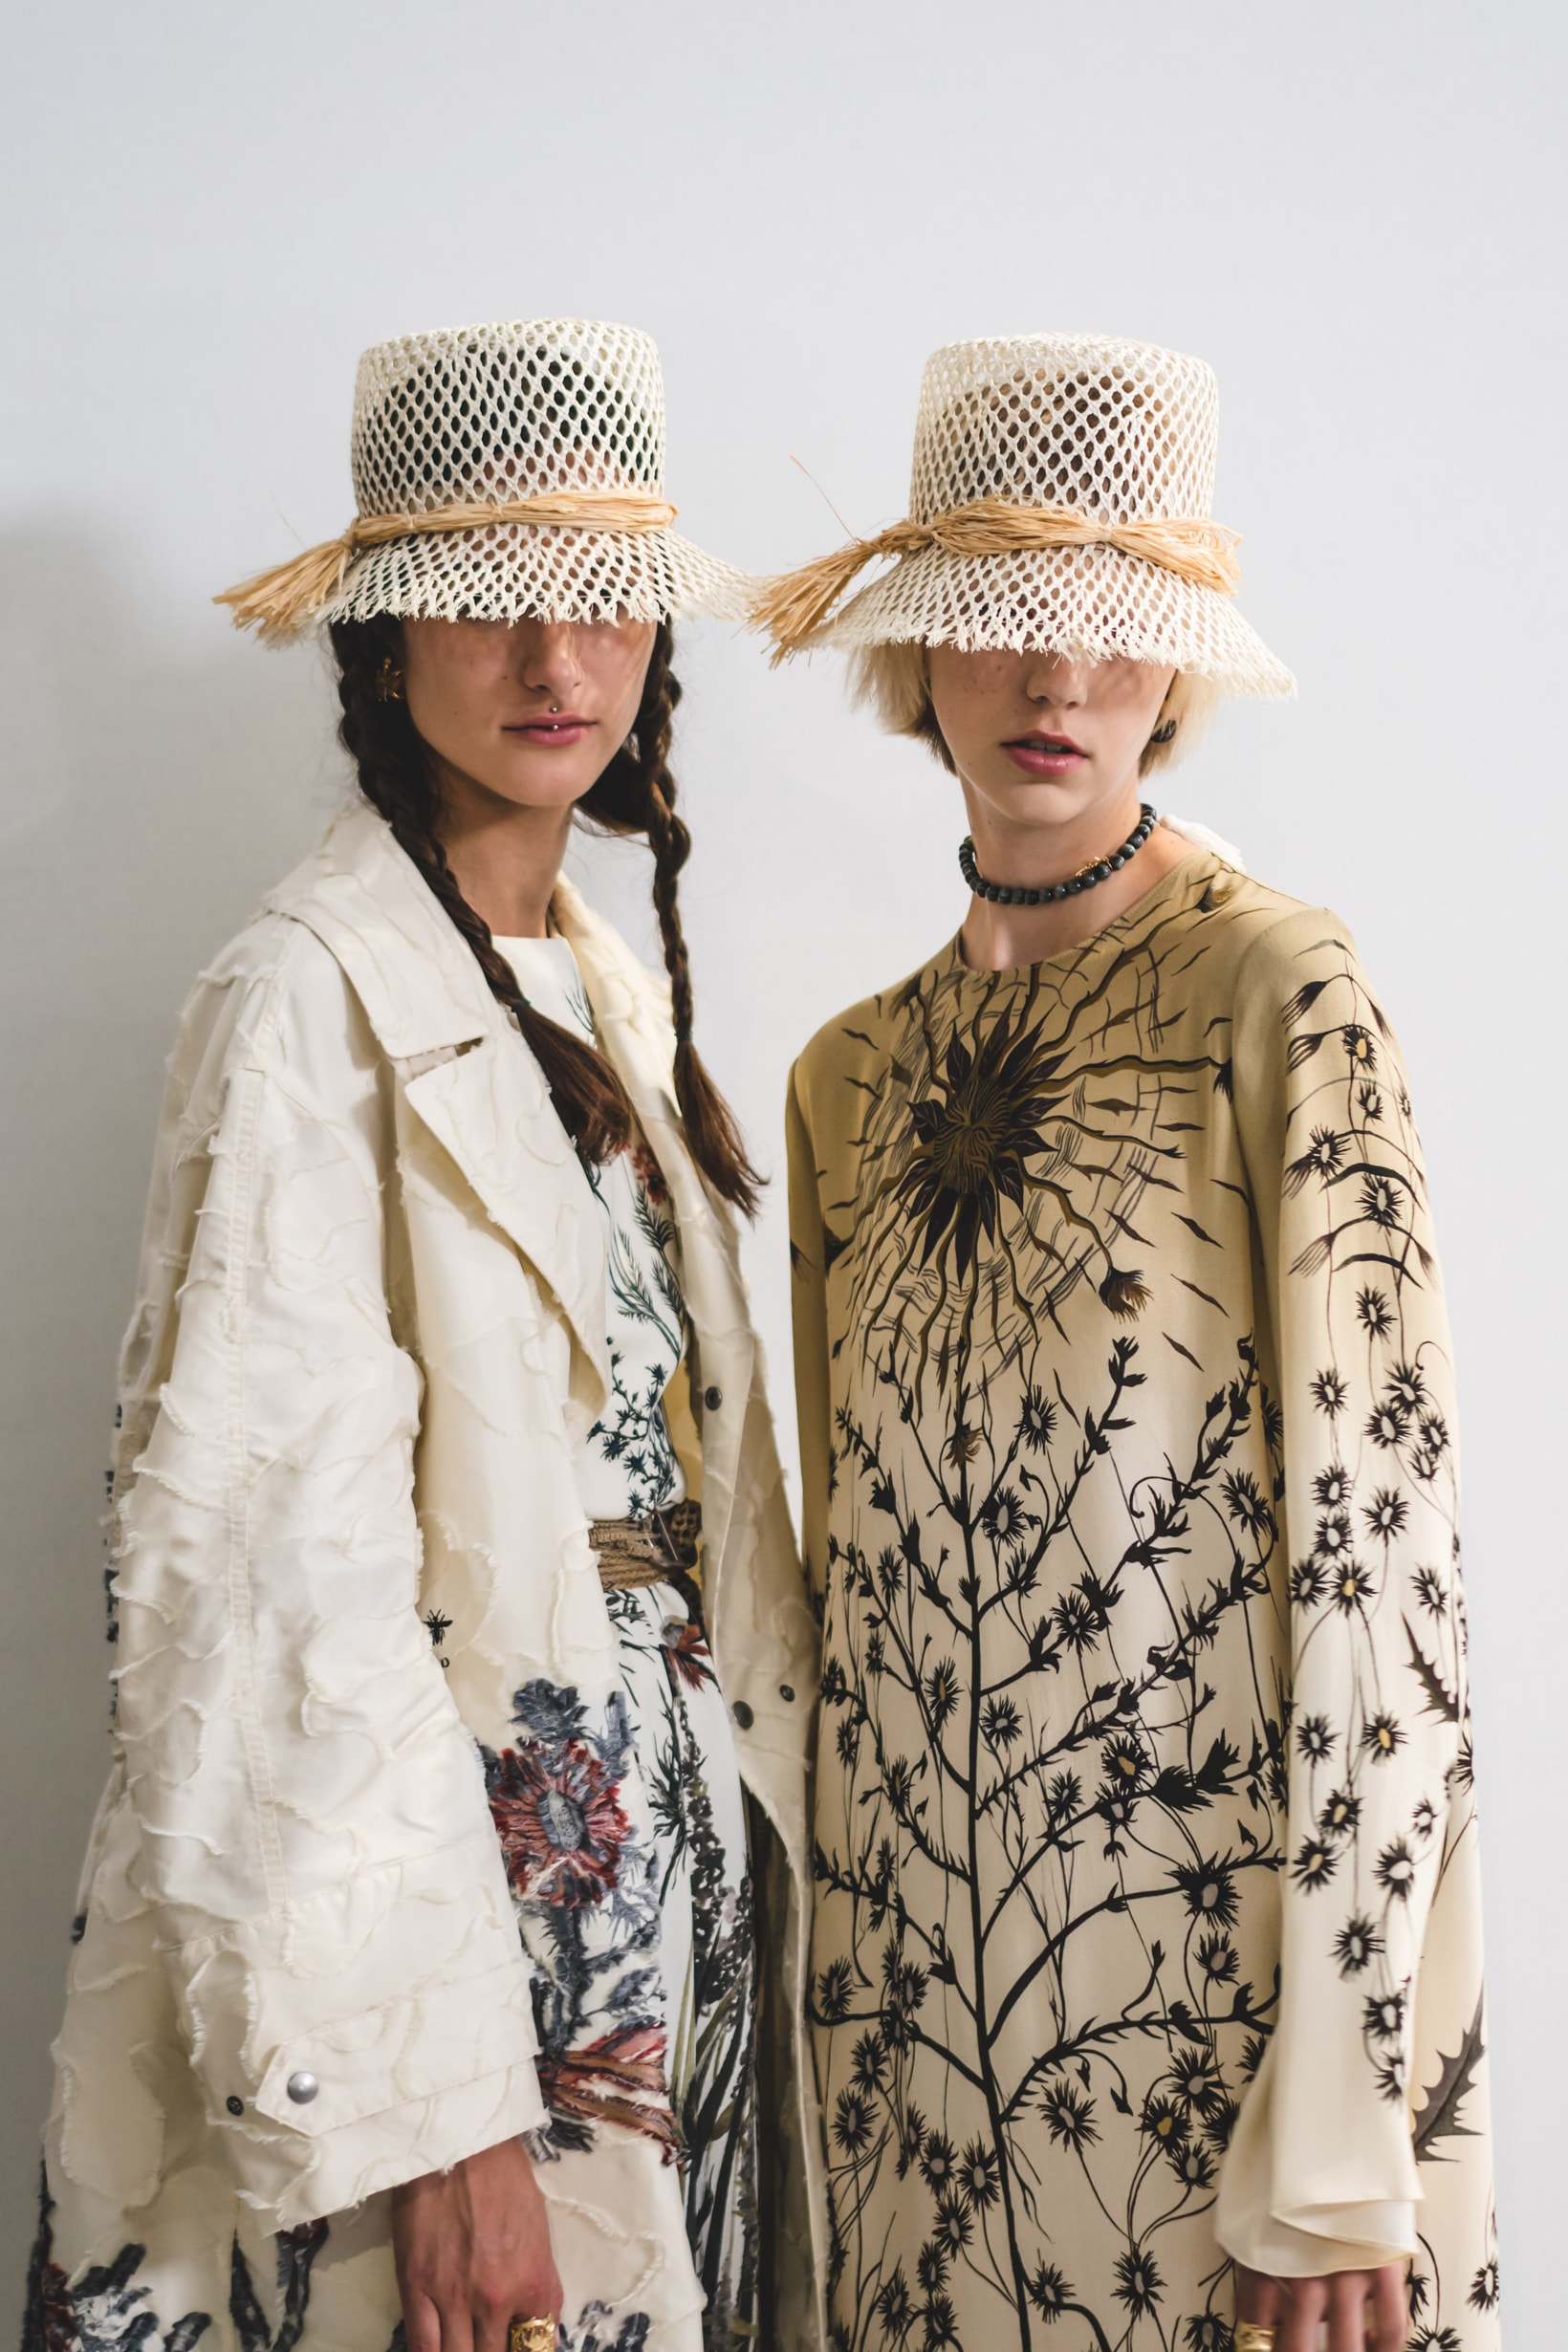 Dior Spring Summer 2020 Paris Fashion Week Collection Show Backstage Look Hats Tan Jacket White